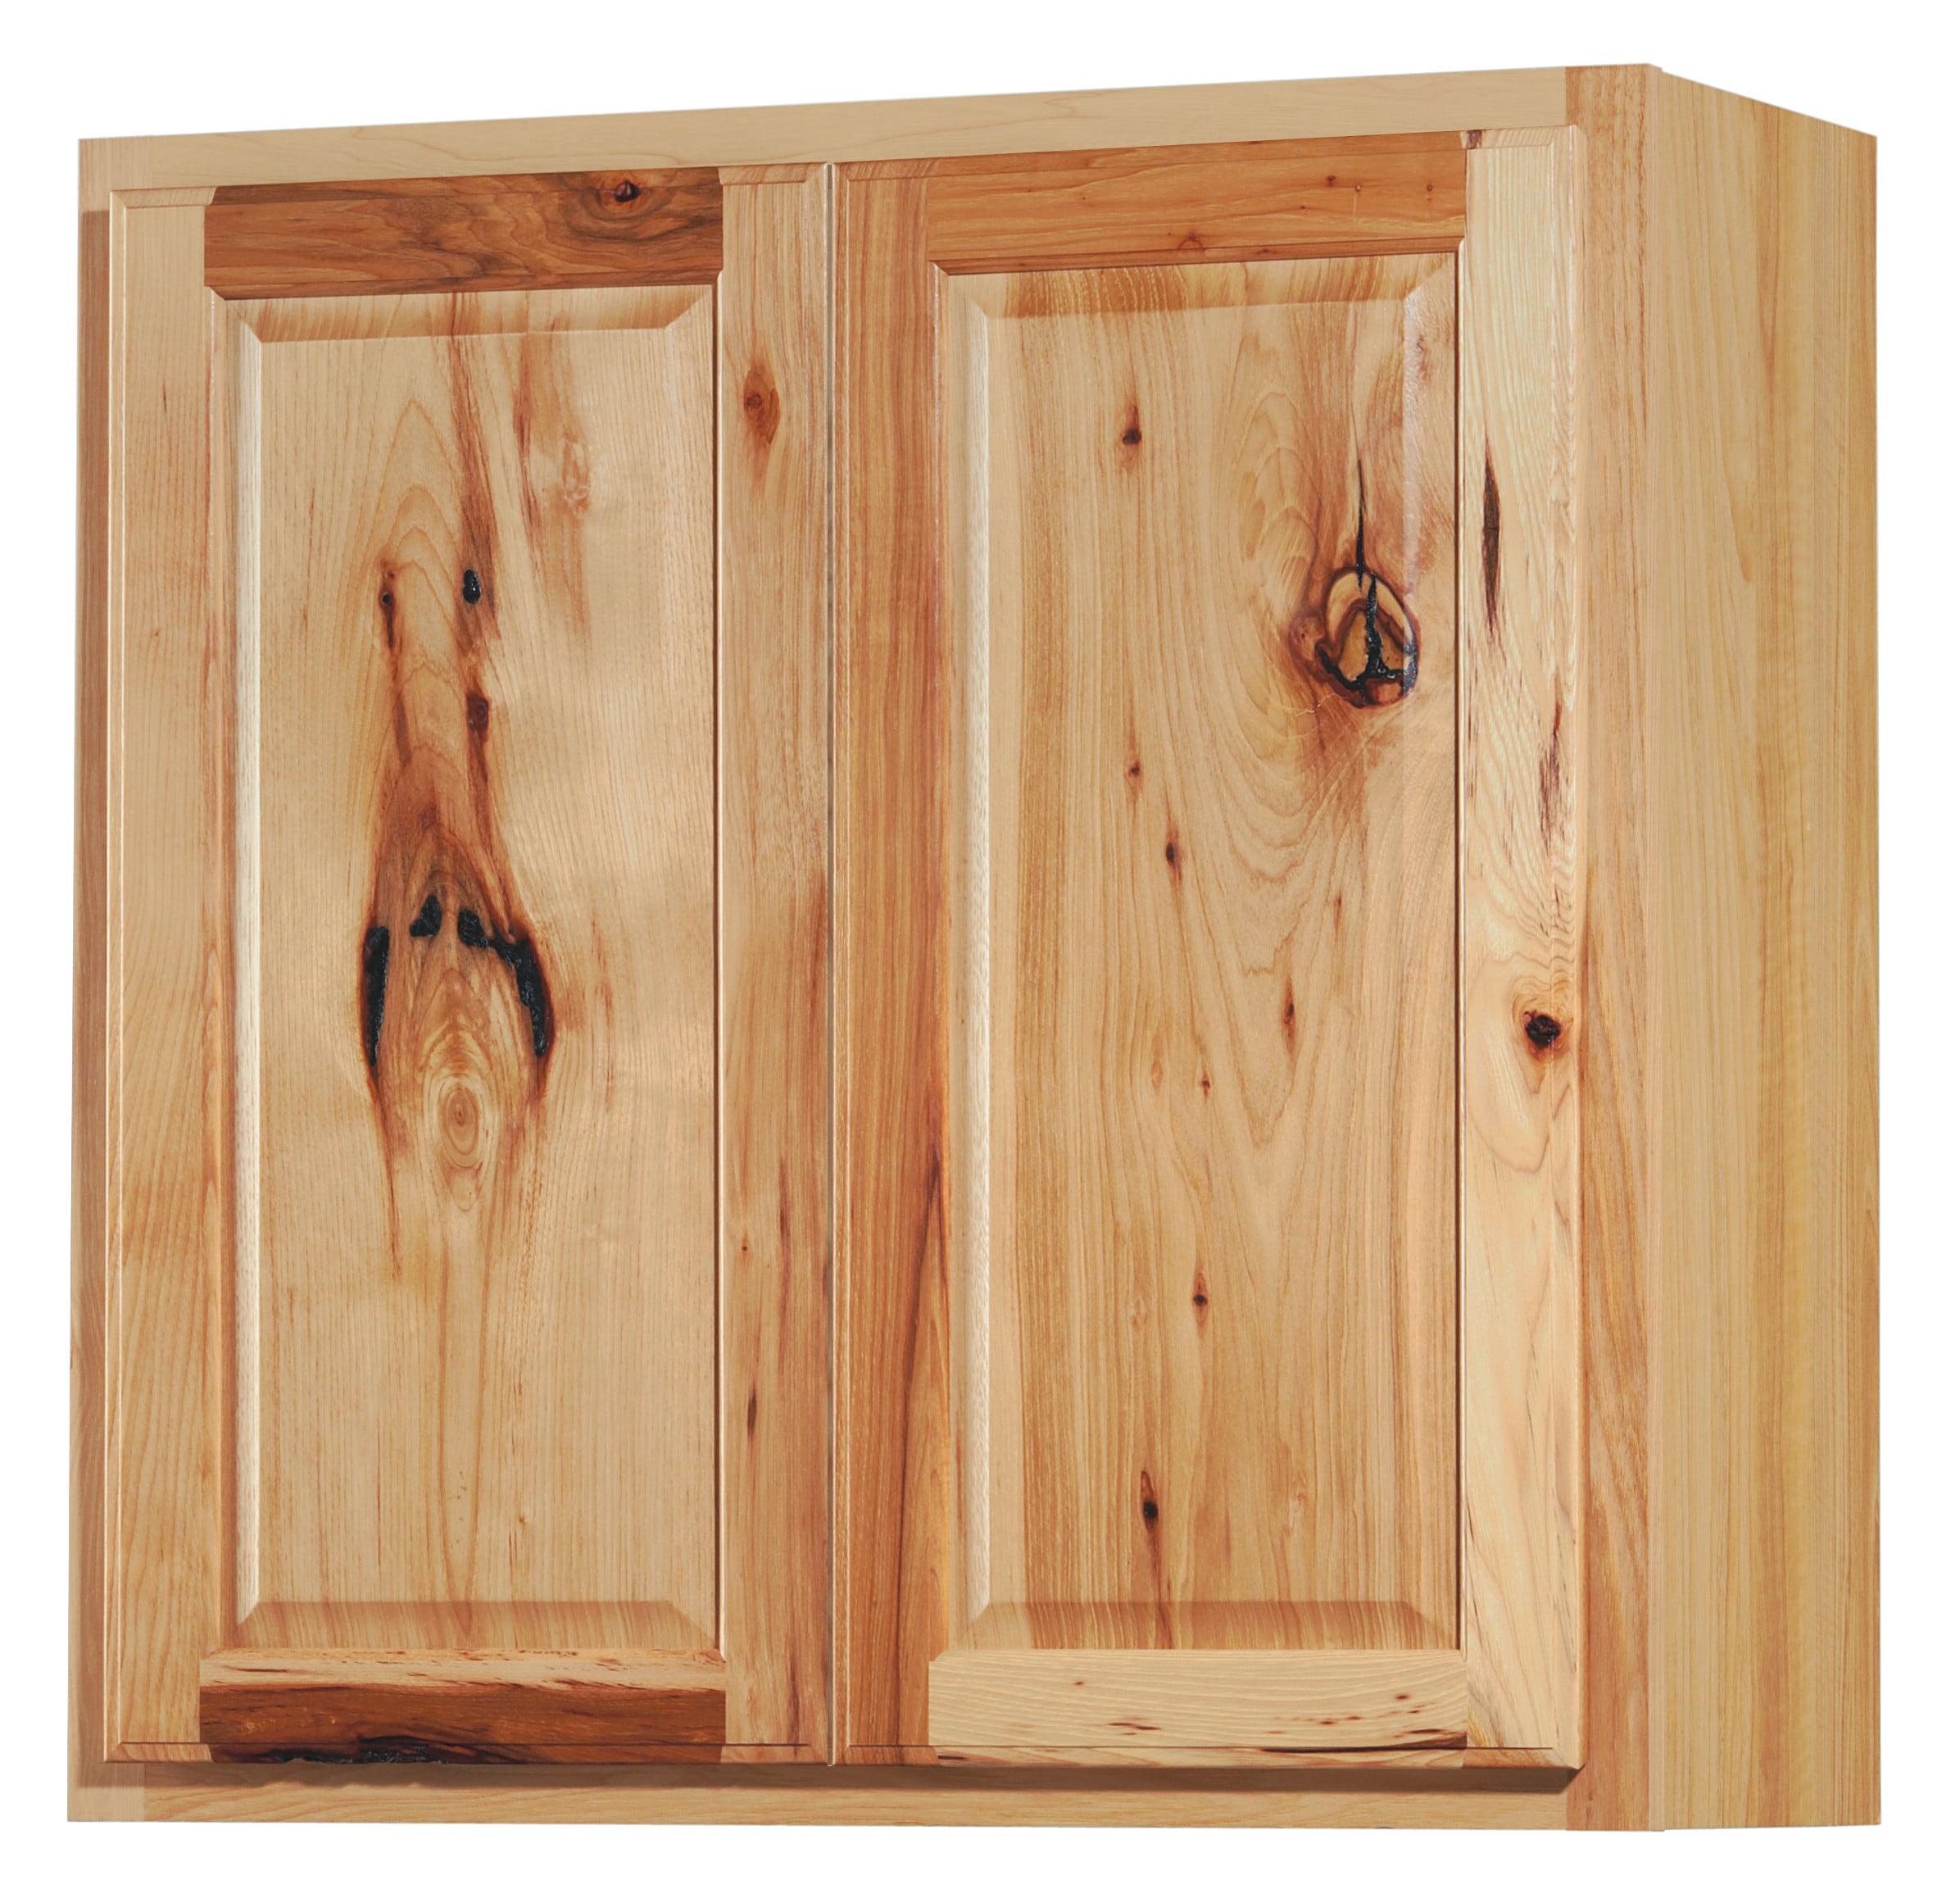 WES530 Country Oak Wall End Shelf # Kitchen Cabinets